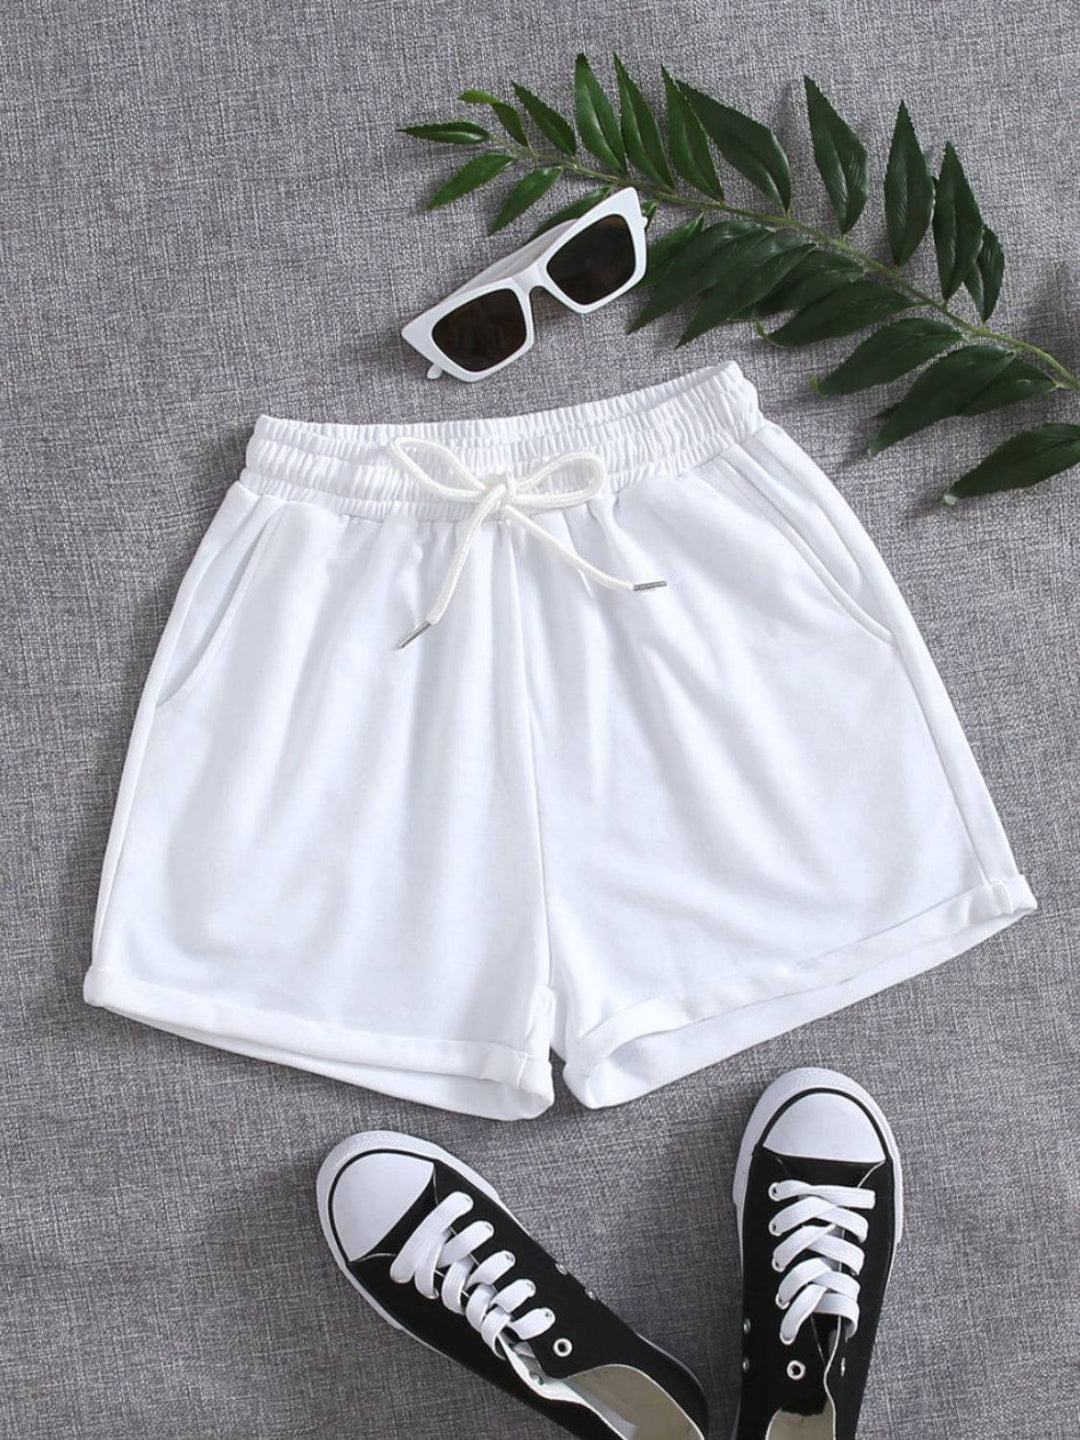 a pair of white shorts and a pair of sunglasses